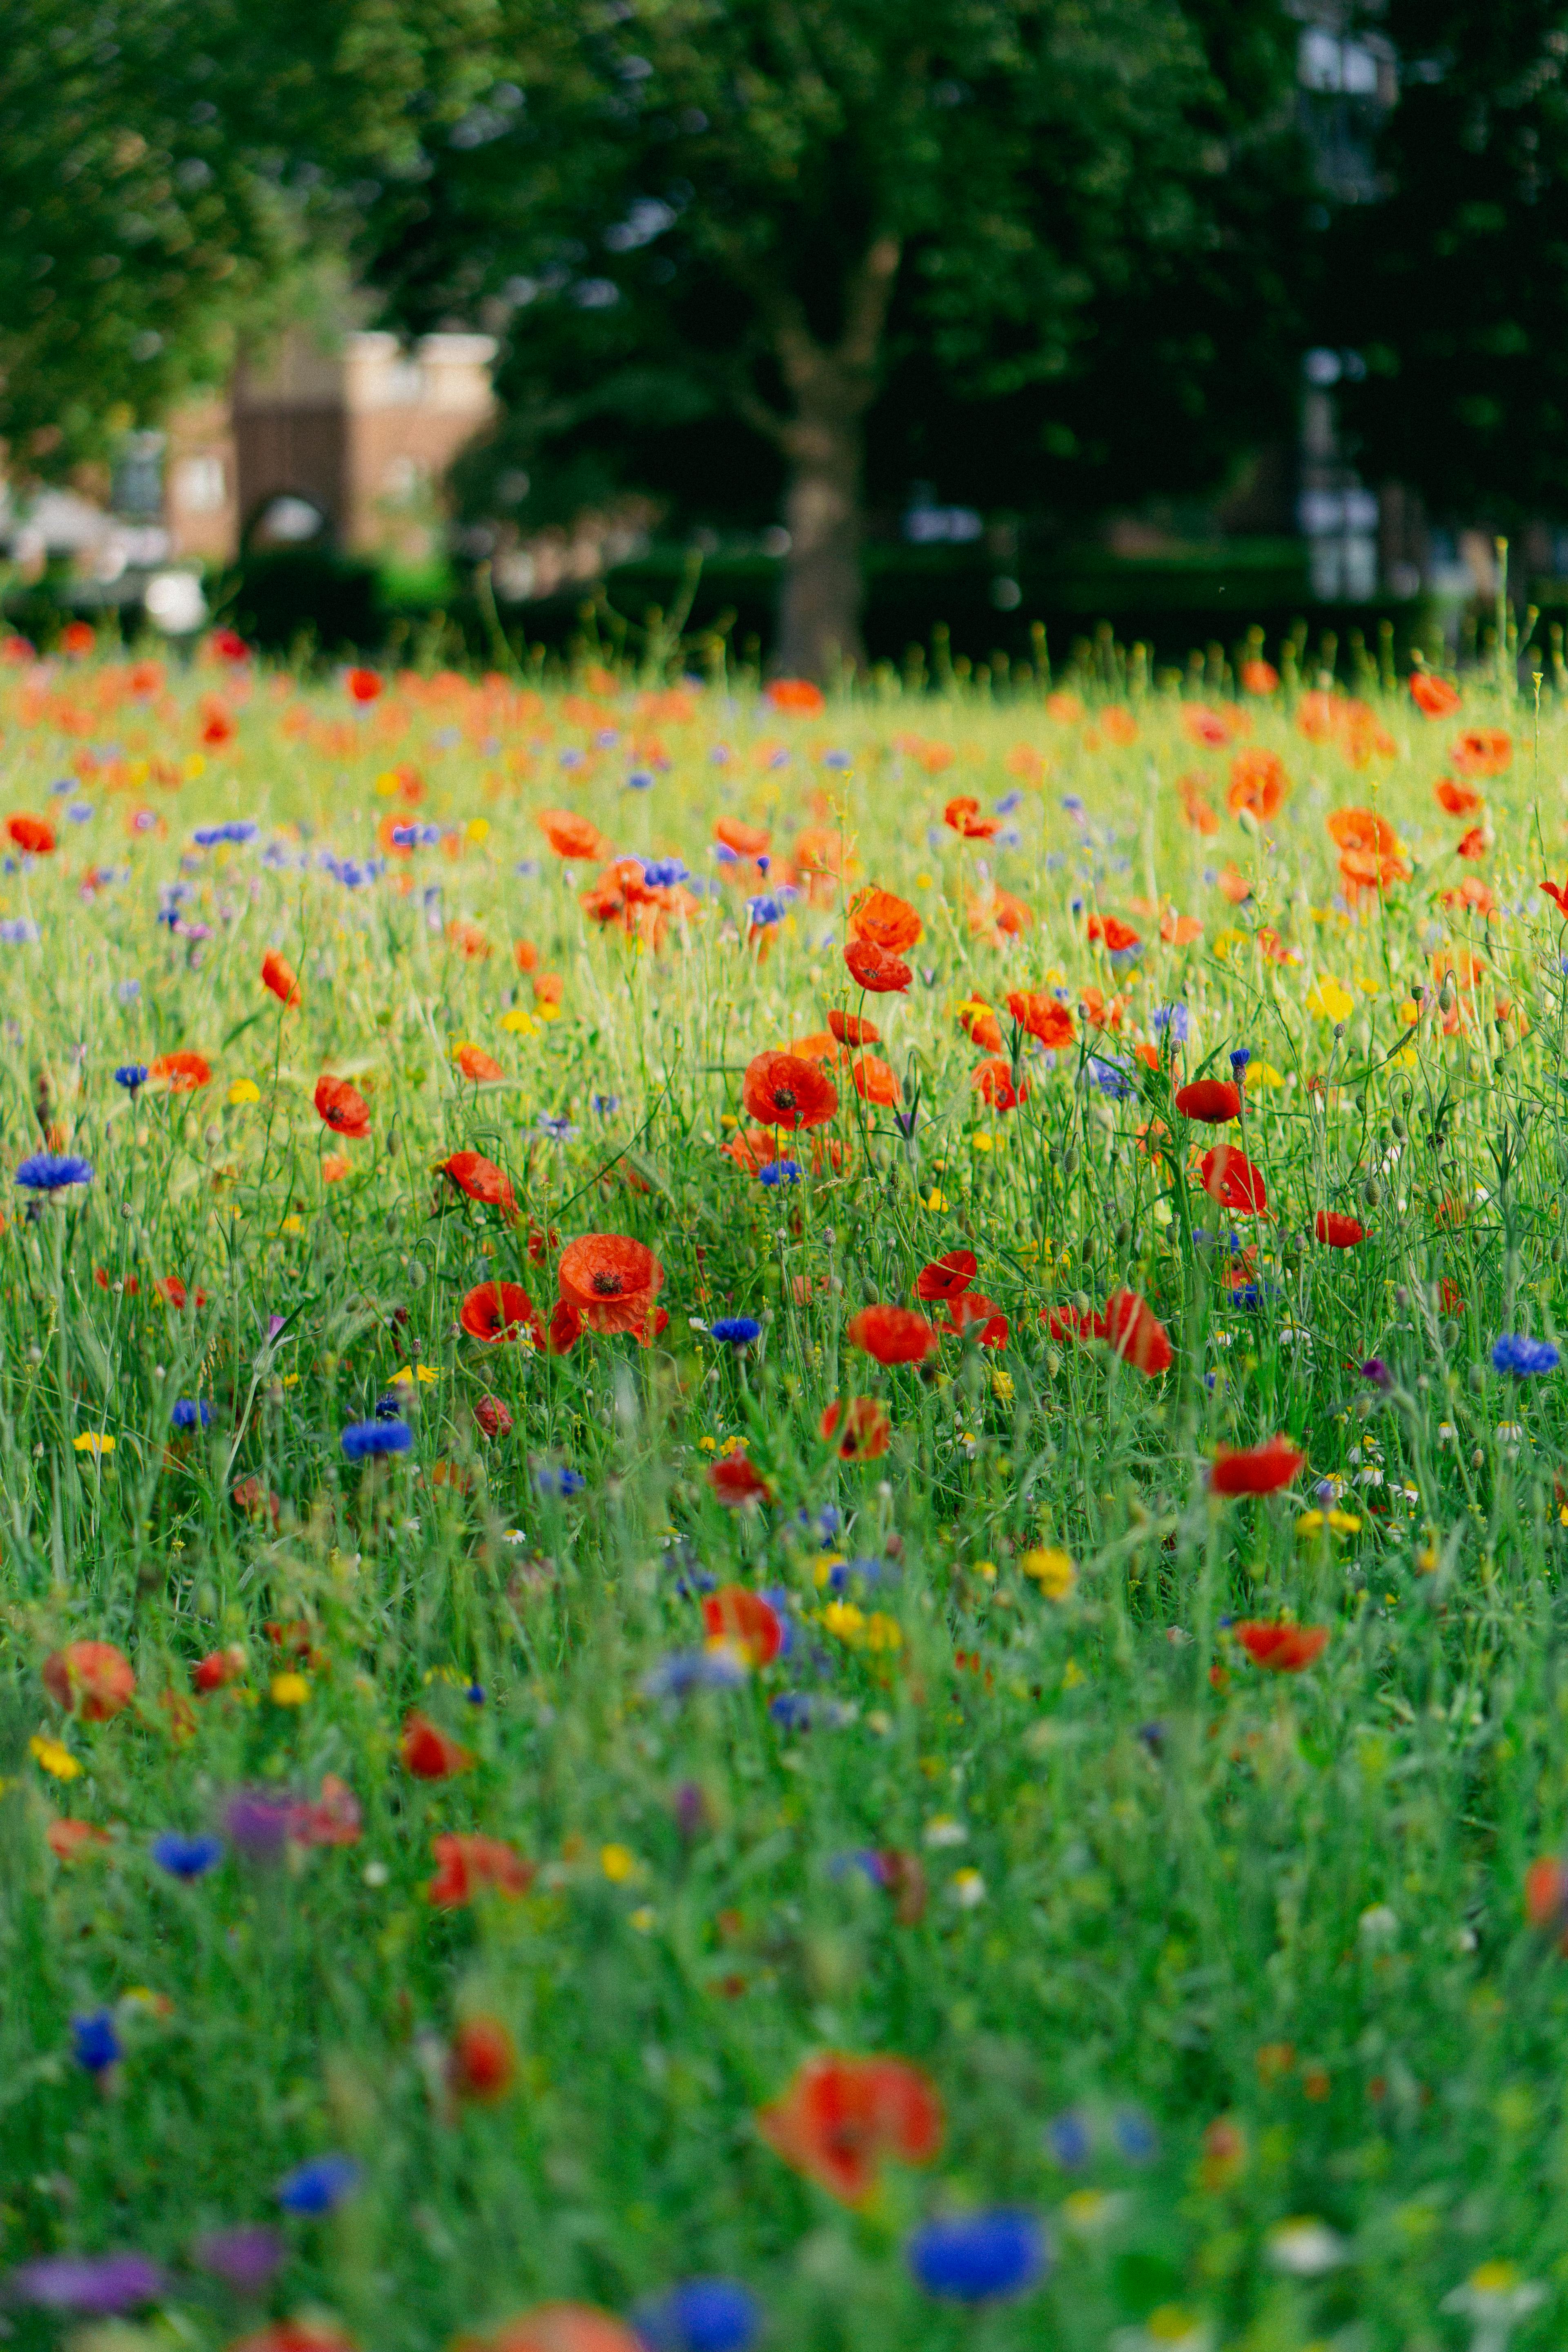 A field of wildflowers; vibrant spots of red poppies, yellow, lilac, and purple flowers pepper a green field.